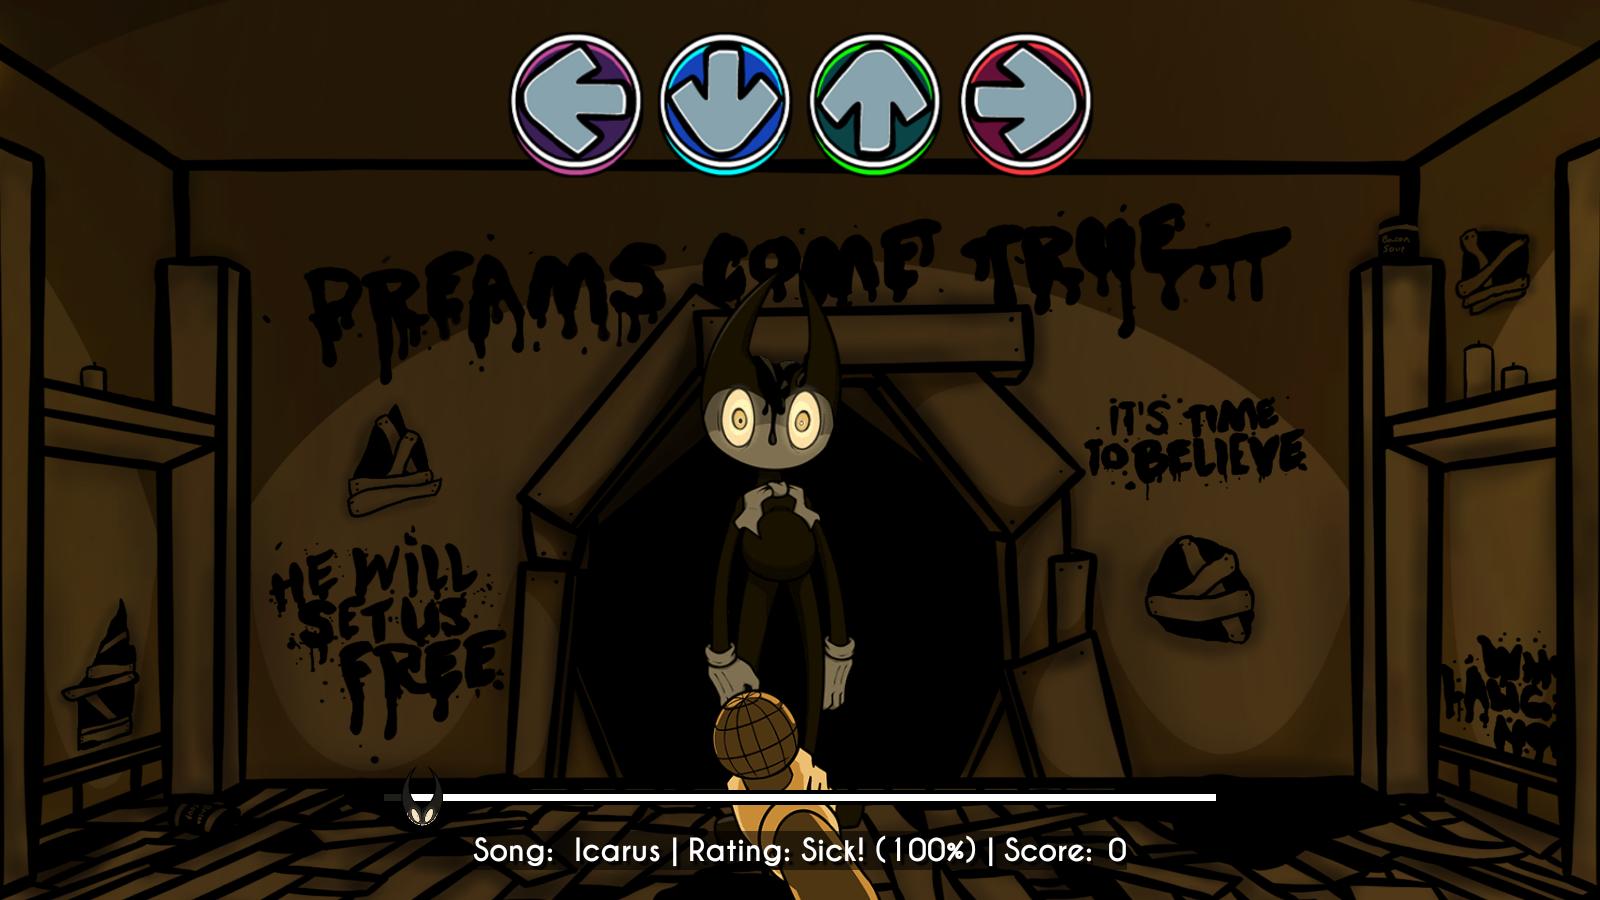 Bendy and the Dark Revival Free Download